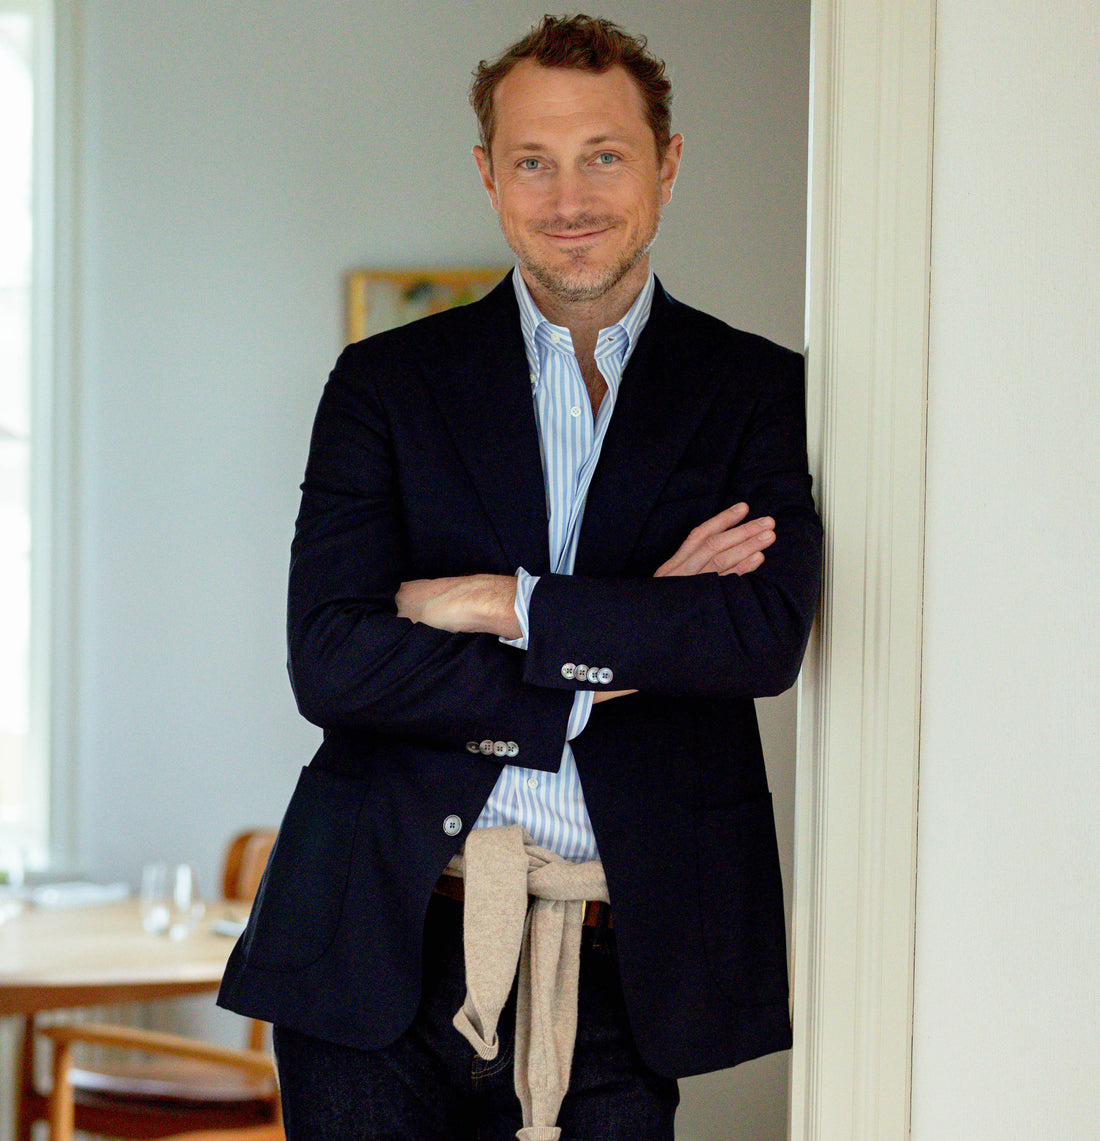 A man in a blazer and striped shirt, arms crossed, smiling and leaning against a doorway in a lightly furnished room.